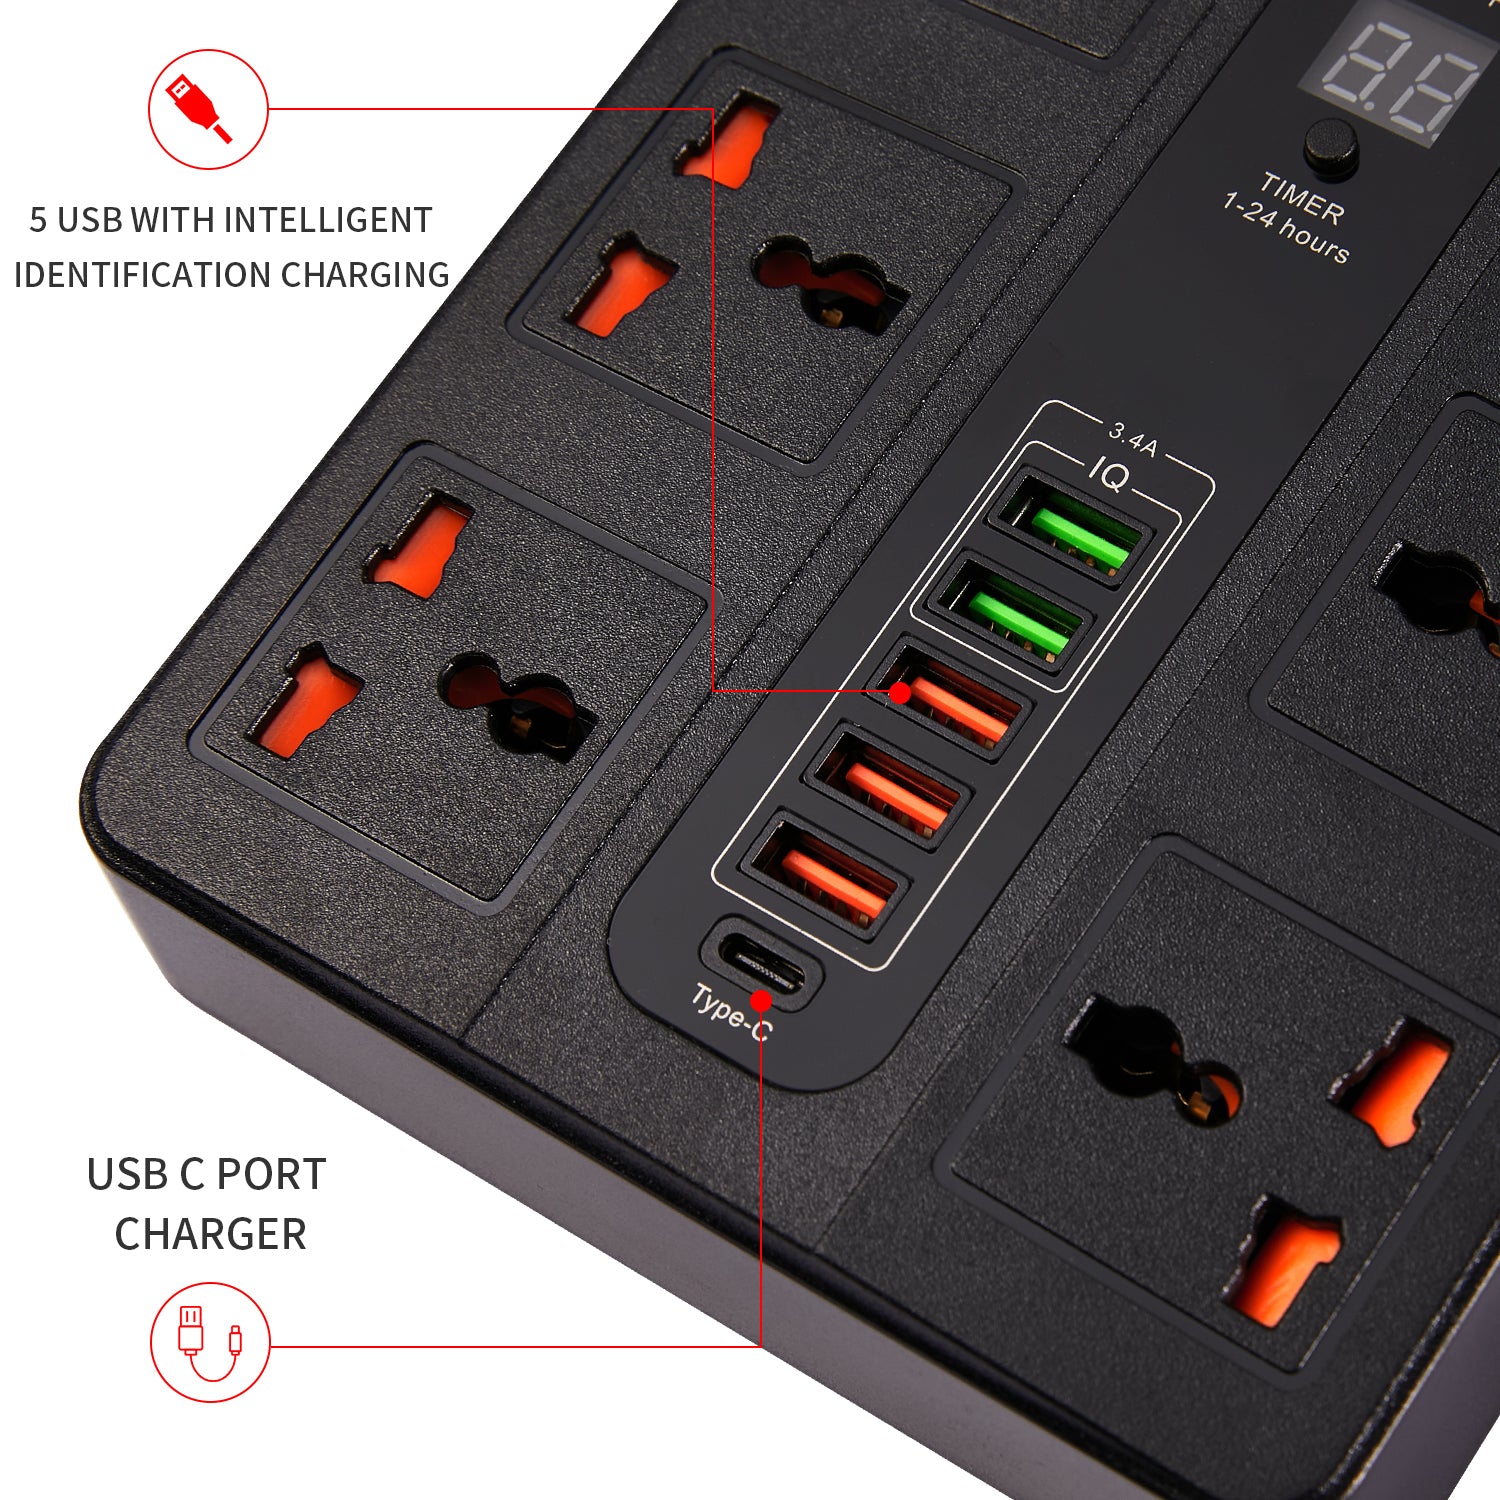 OEM Intelligent 6 Way USB A/USB Type C Charging Ports Power Board Surge Protected USB charger Power Strip